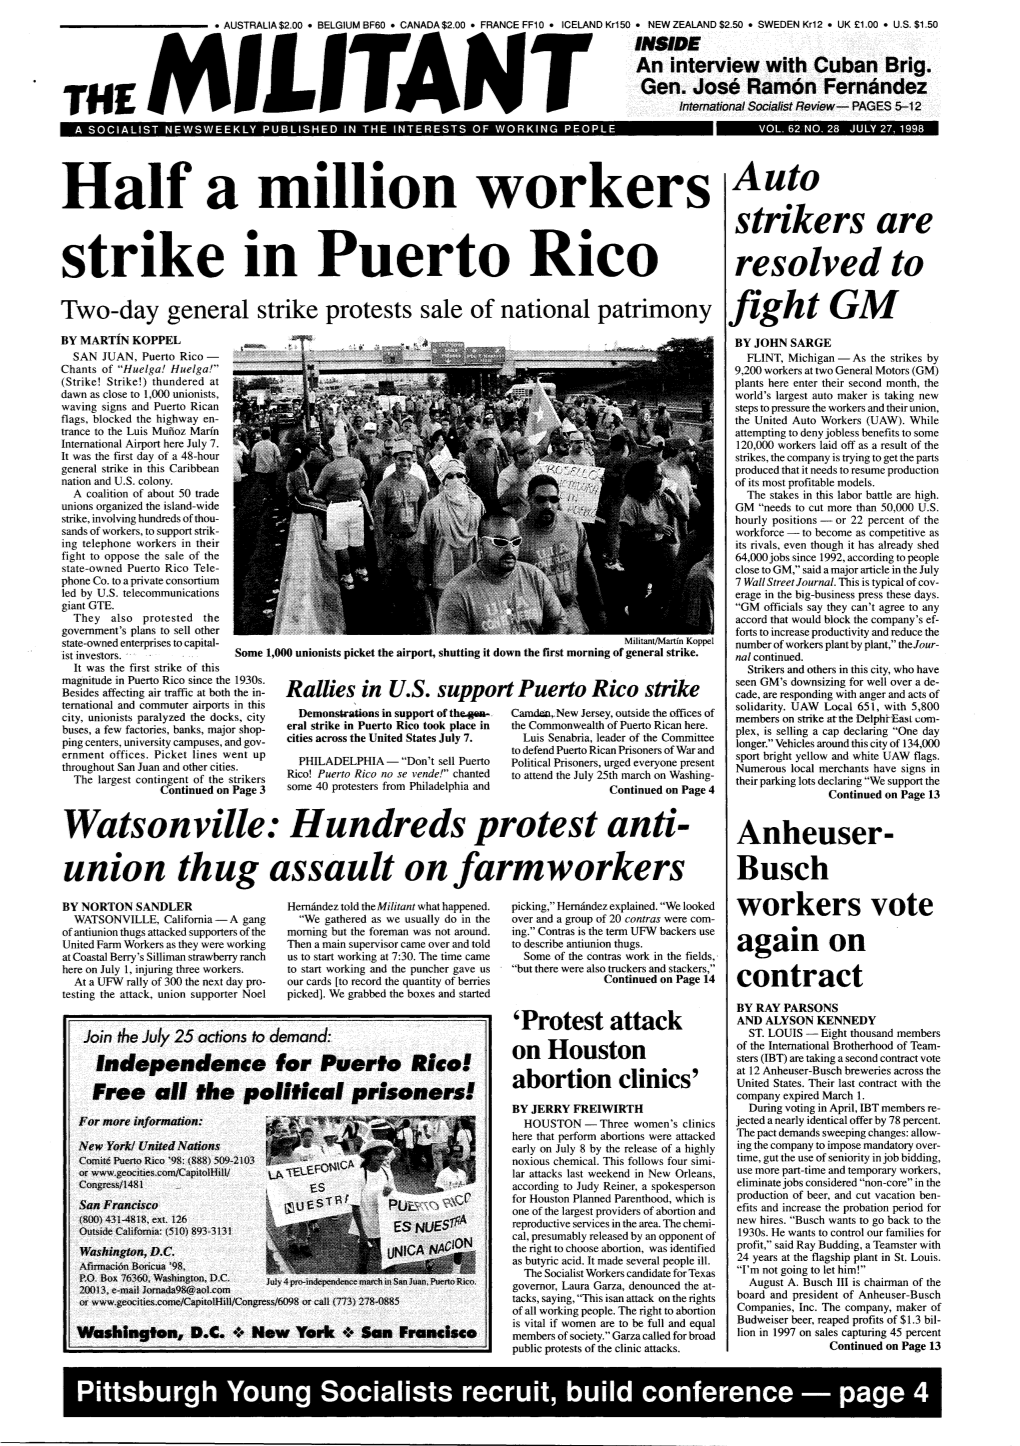 Half a Million Workers Strike in Puerto Rico